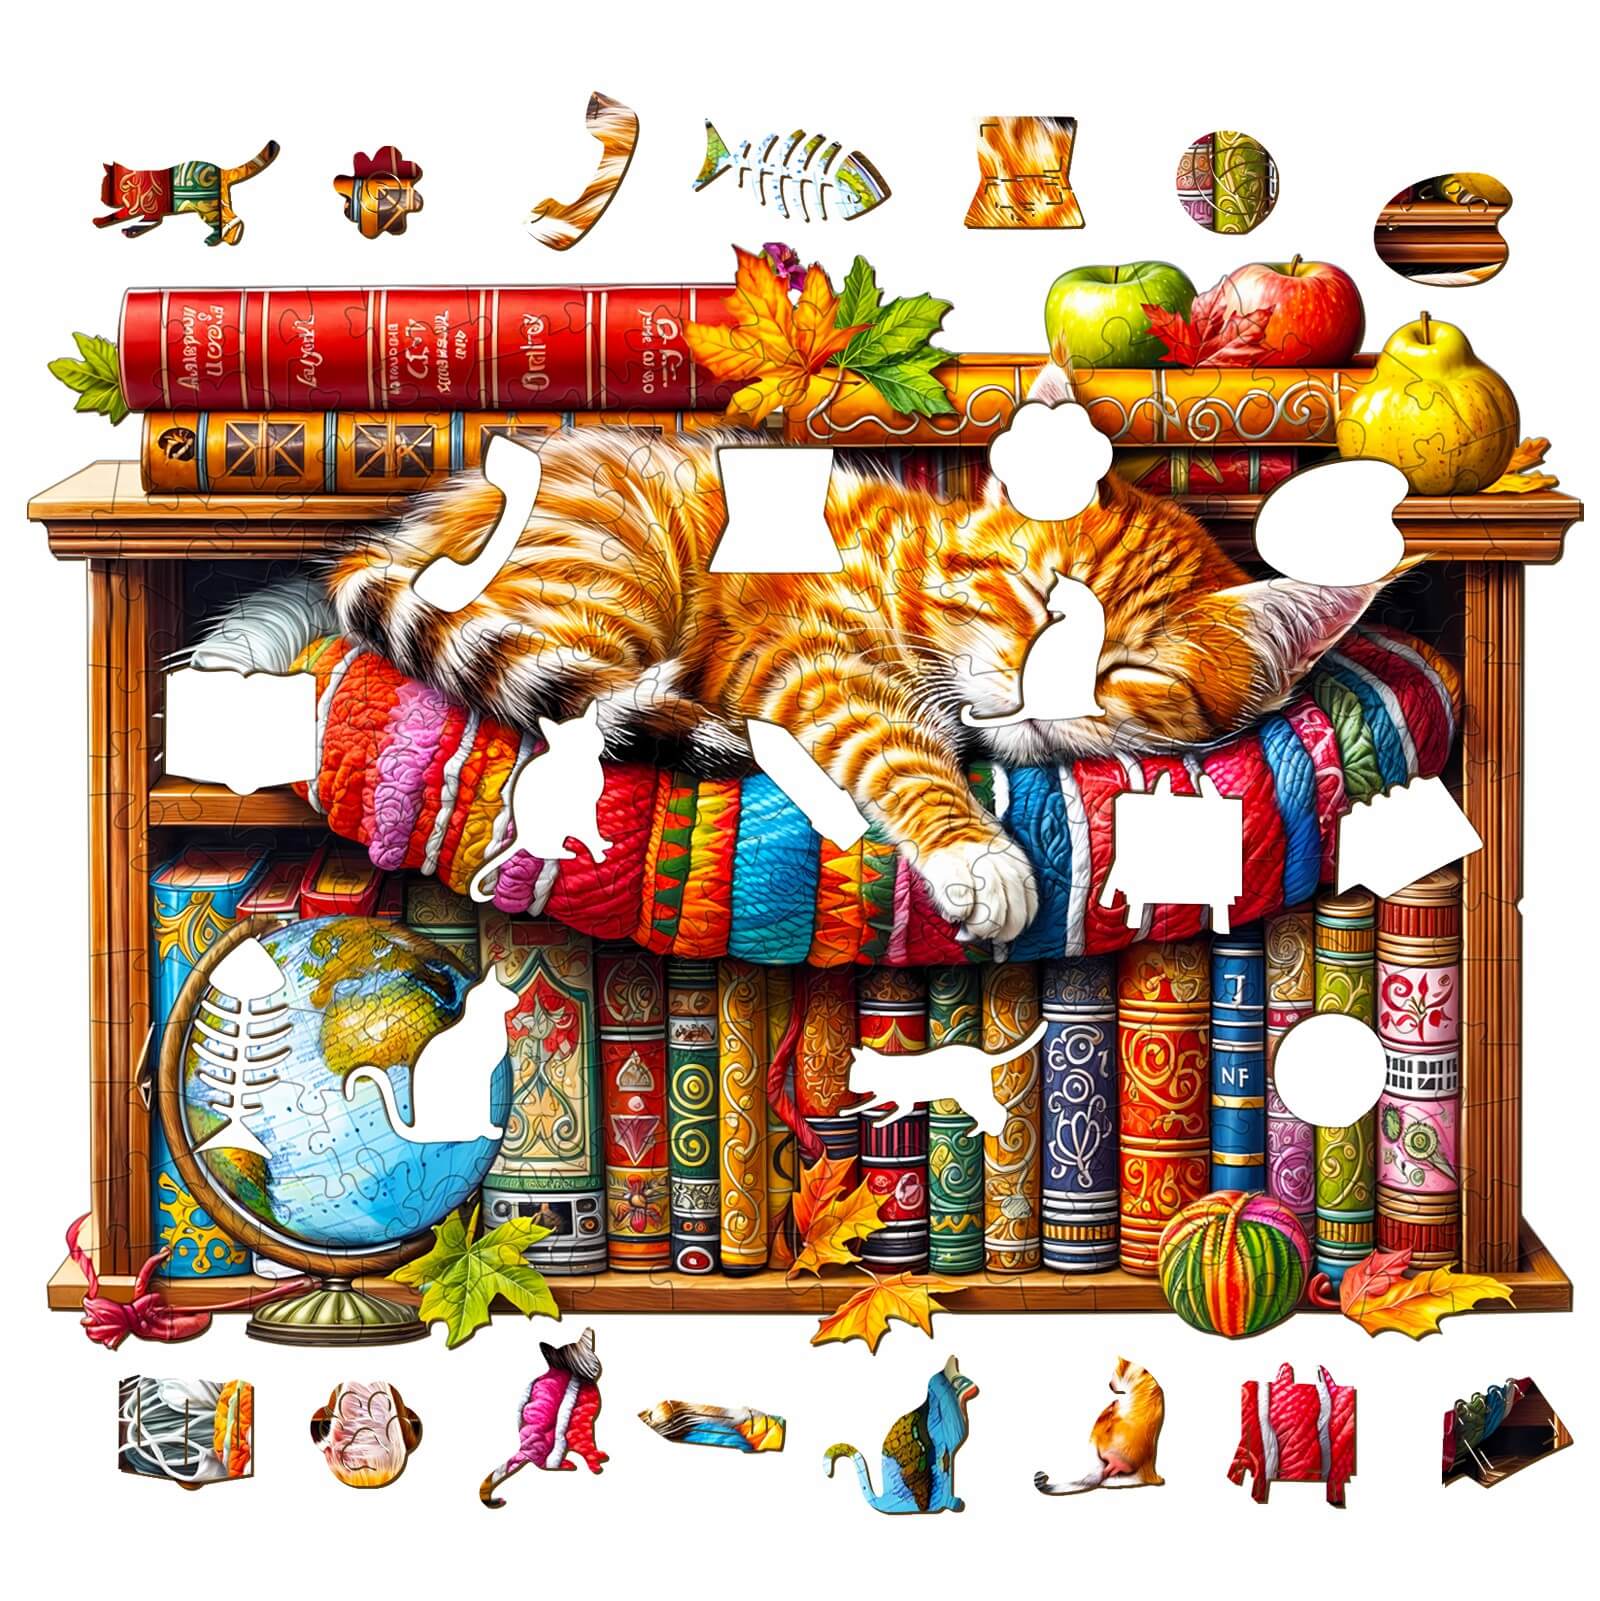 Dreamy Tabby Cat-1 Wooden Jigsaw Puzzle